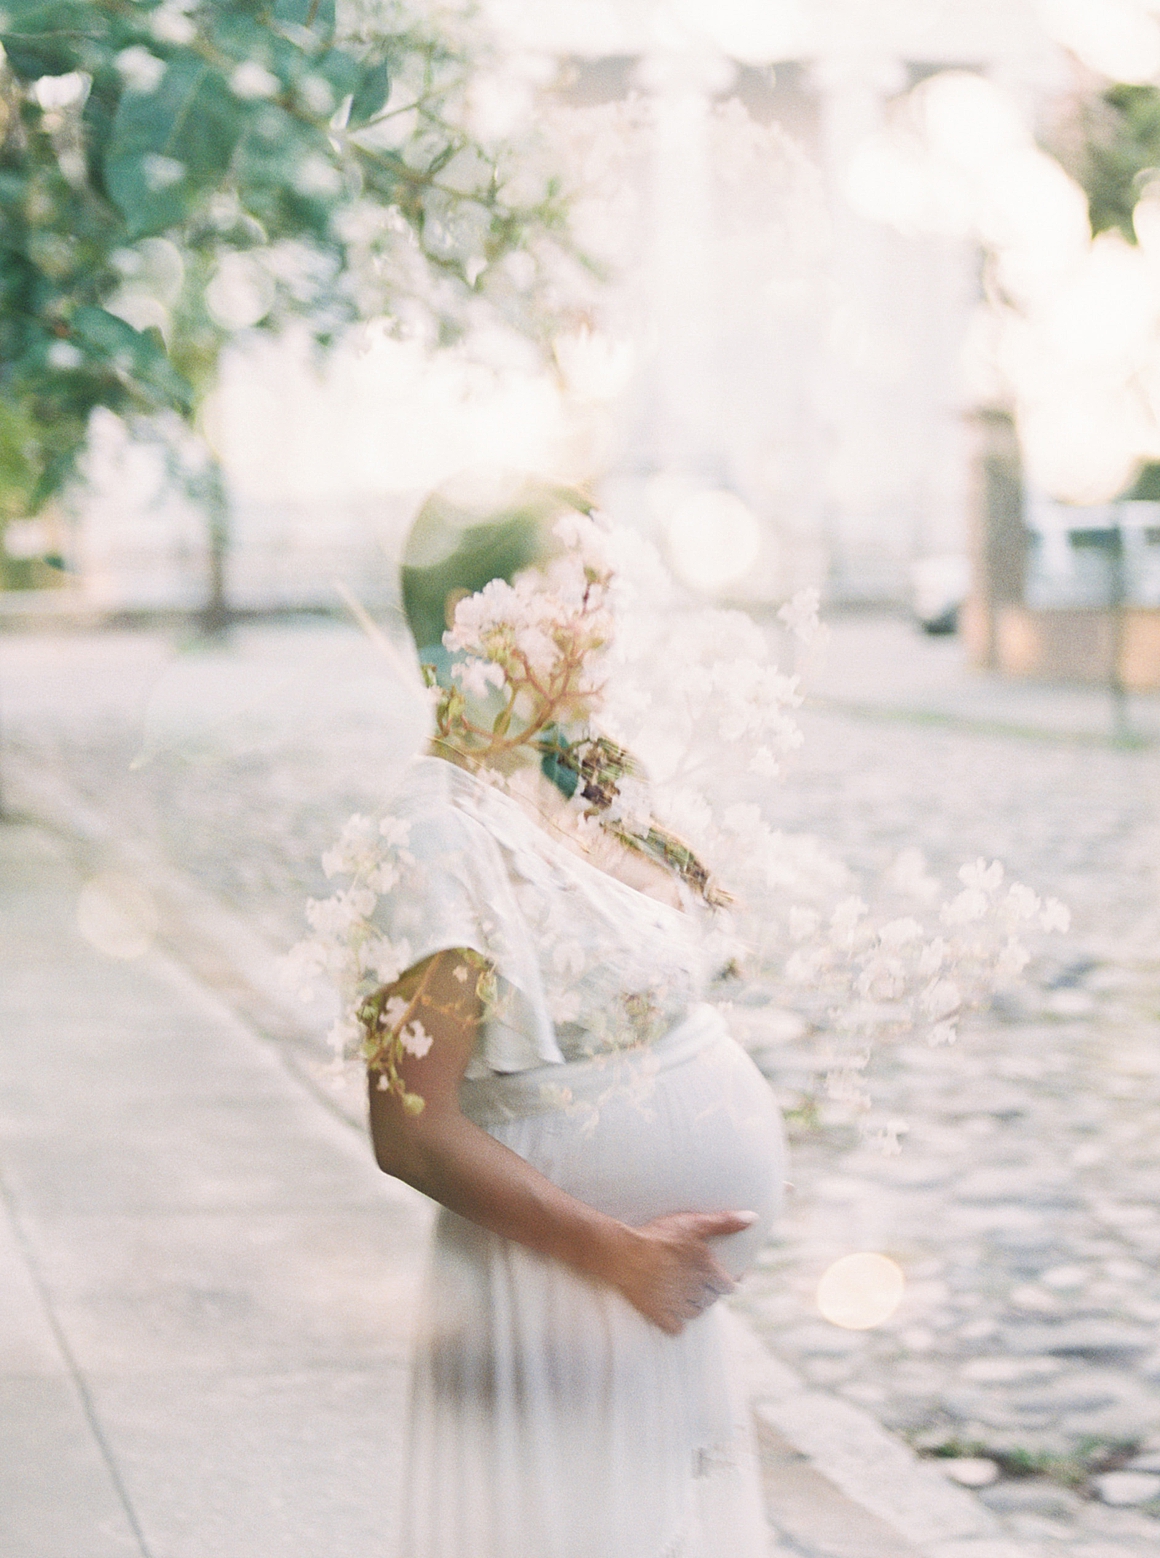 Double exposure of maternity session in Charleston. Photo by Caitlyn Motycka Photography.